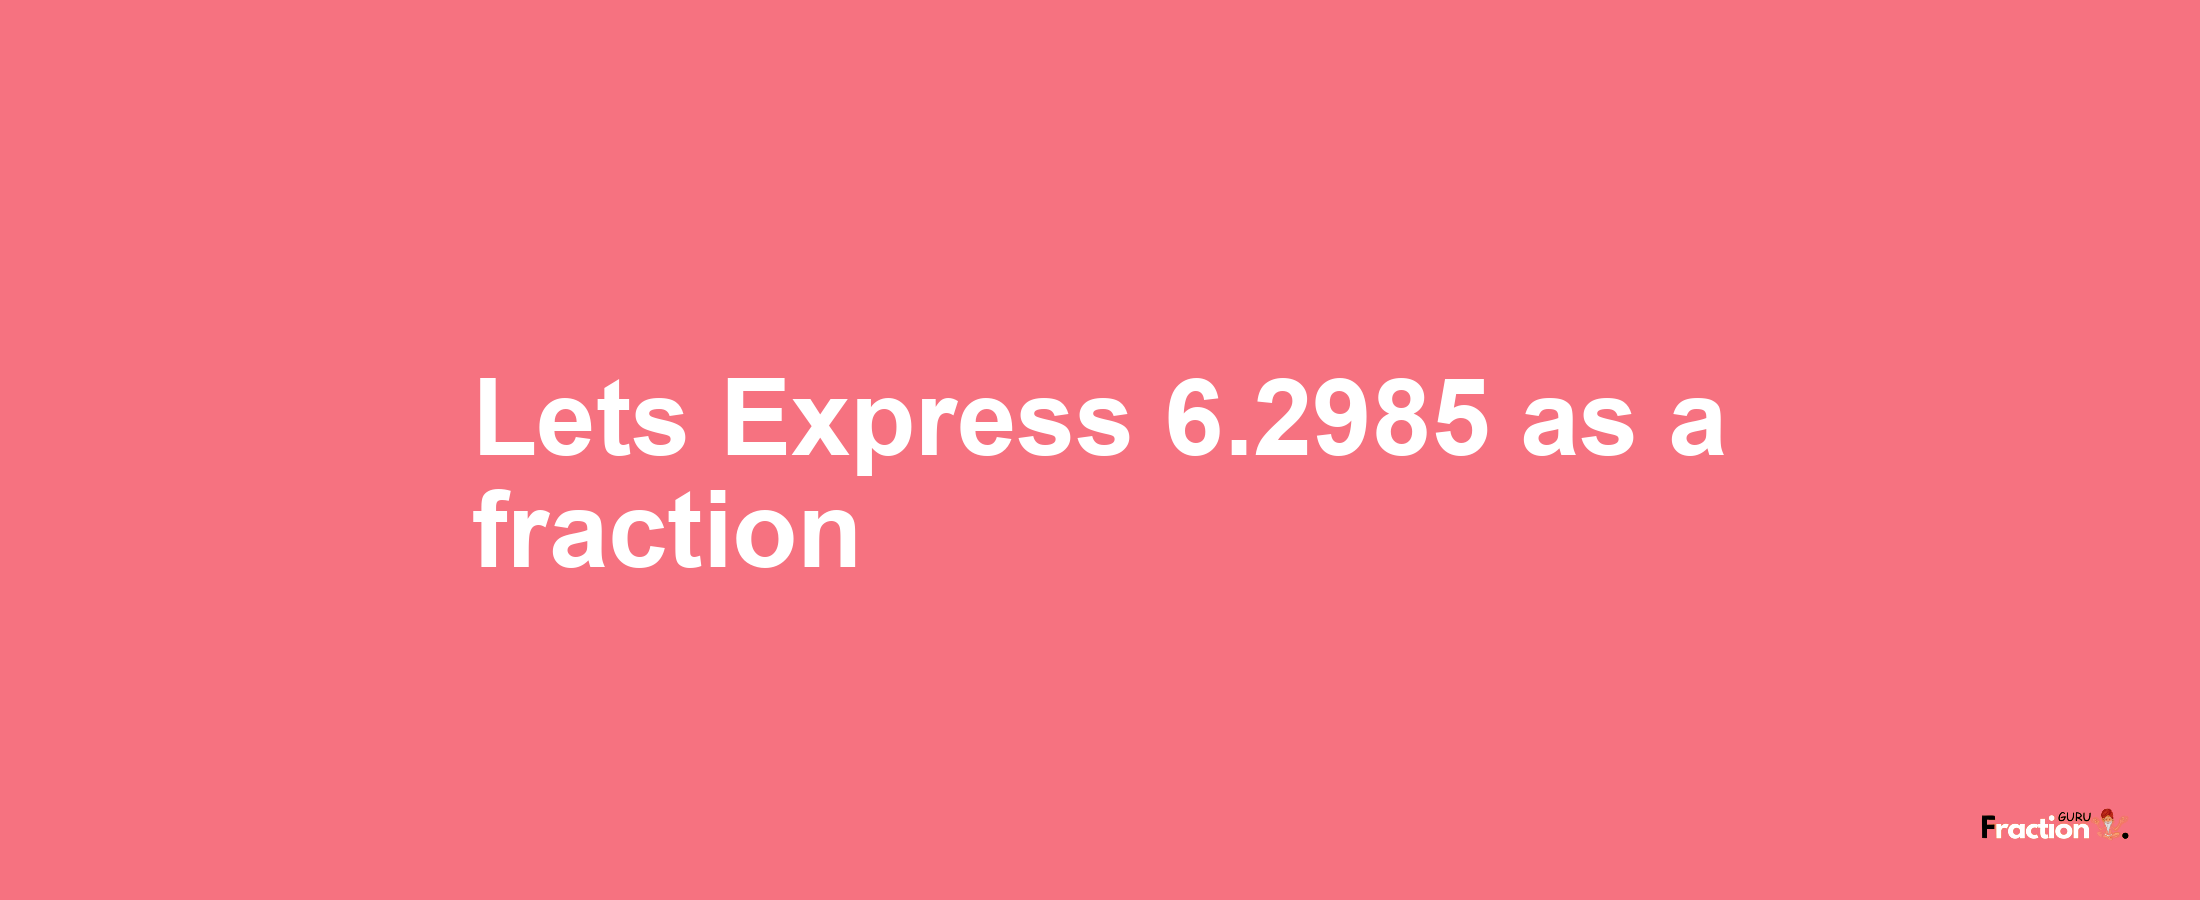 Lets Express 6.2985 as afraction